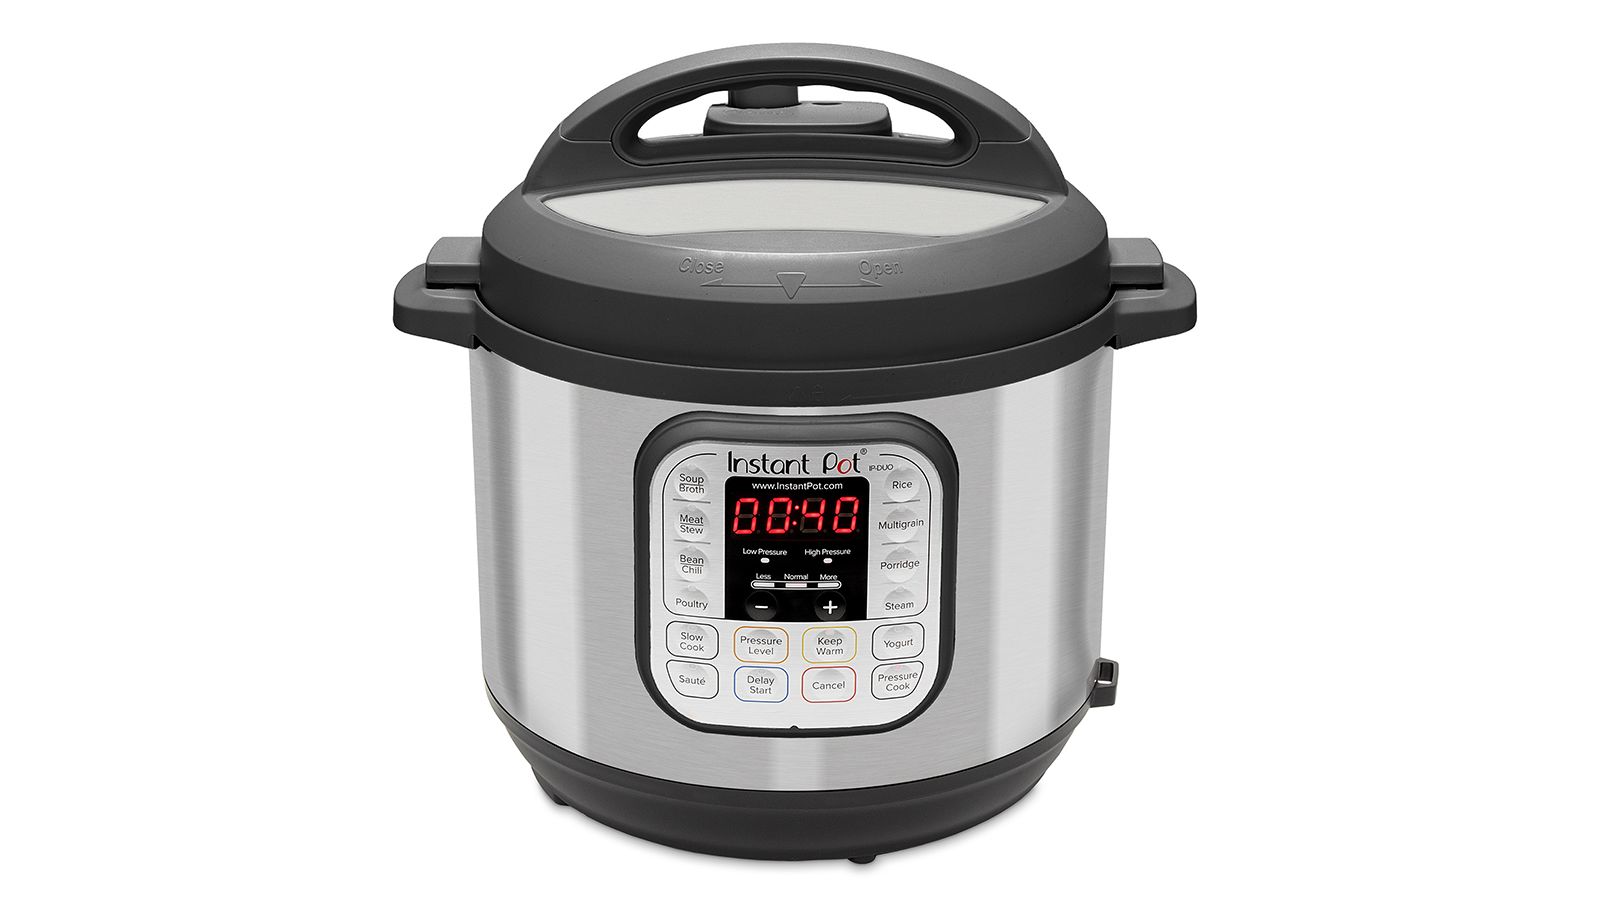 Instant Pot IPDuo-30 Duo Mini, Stainless Steel, 800 W, 3 liters 220 volts  NOT FOR USA